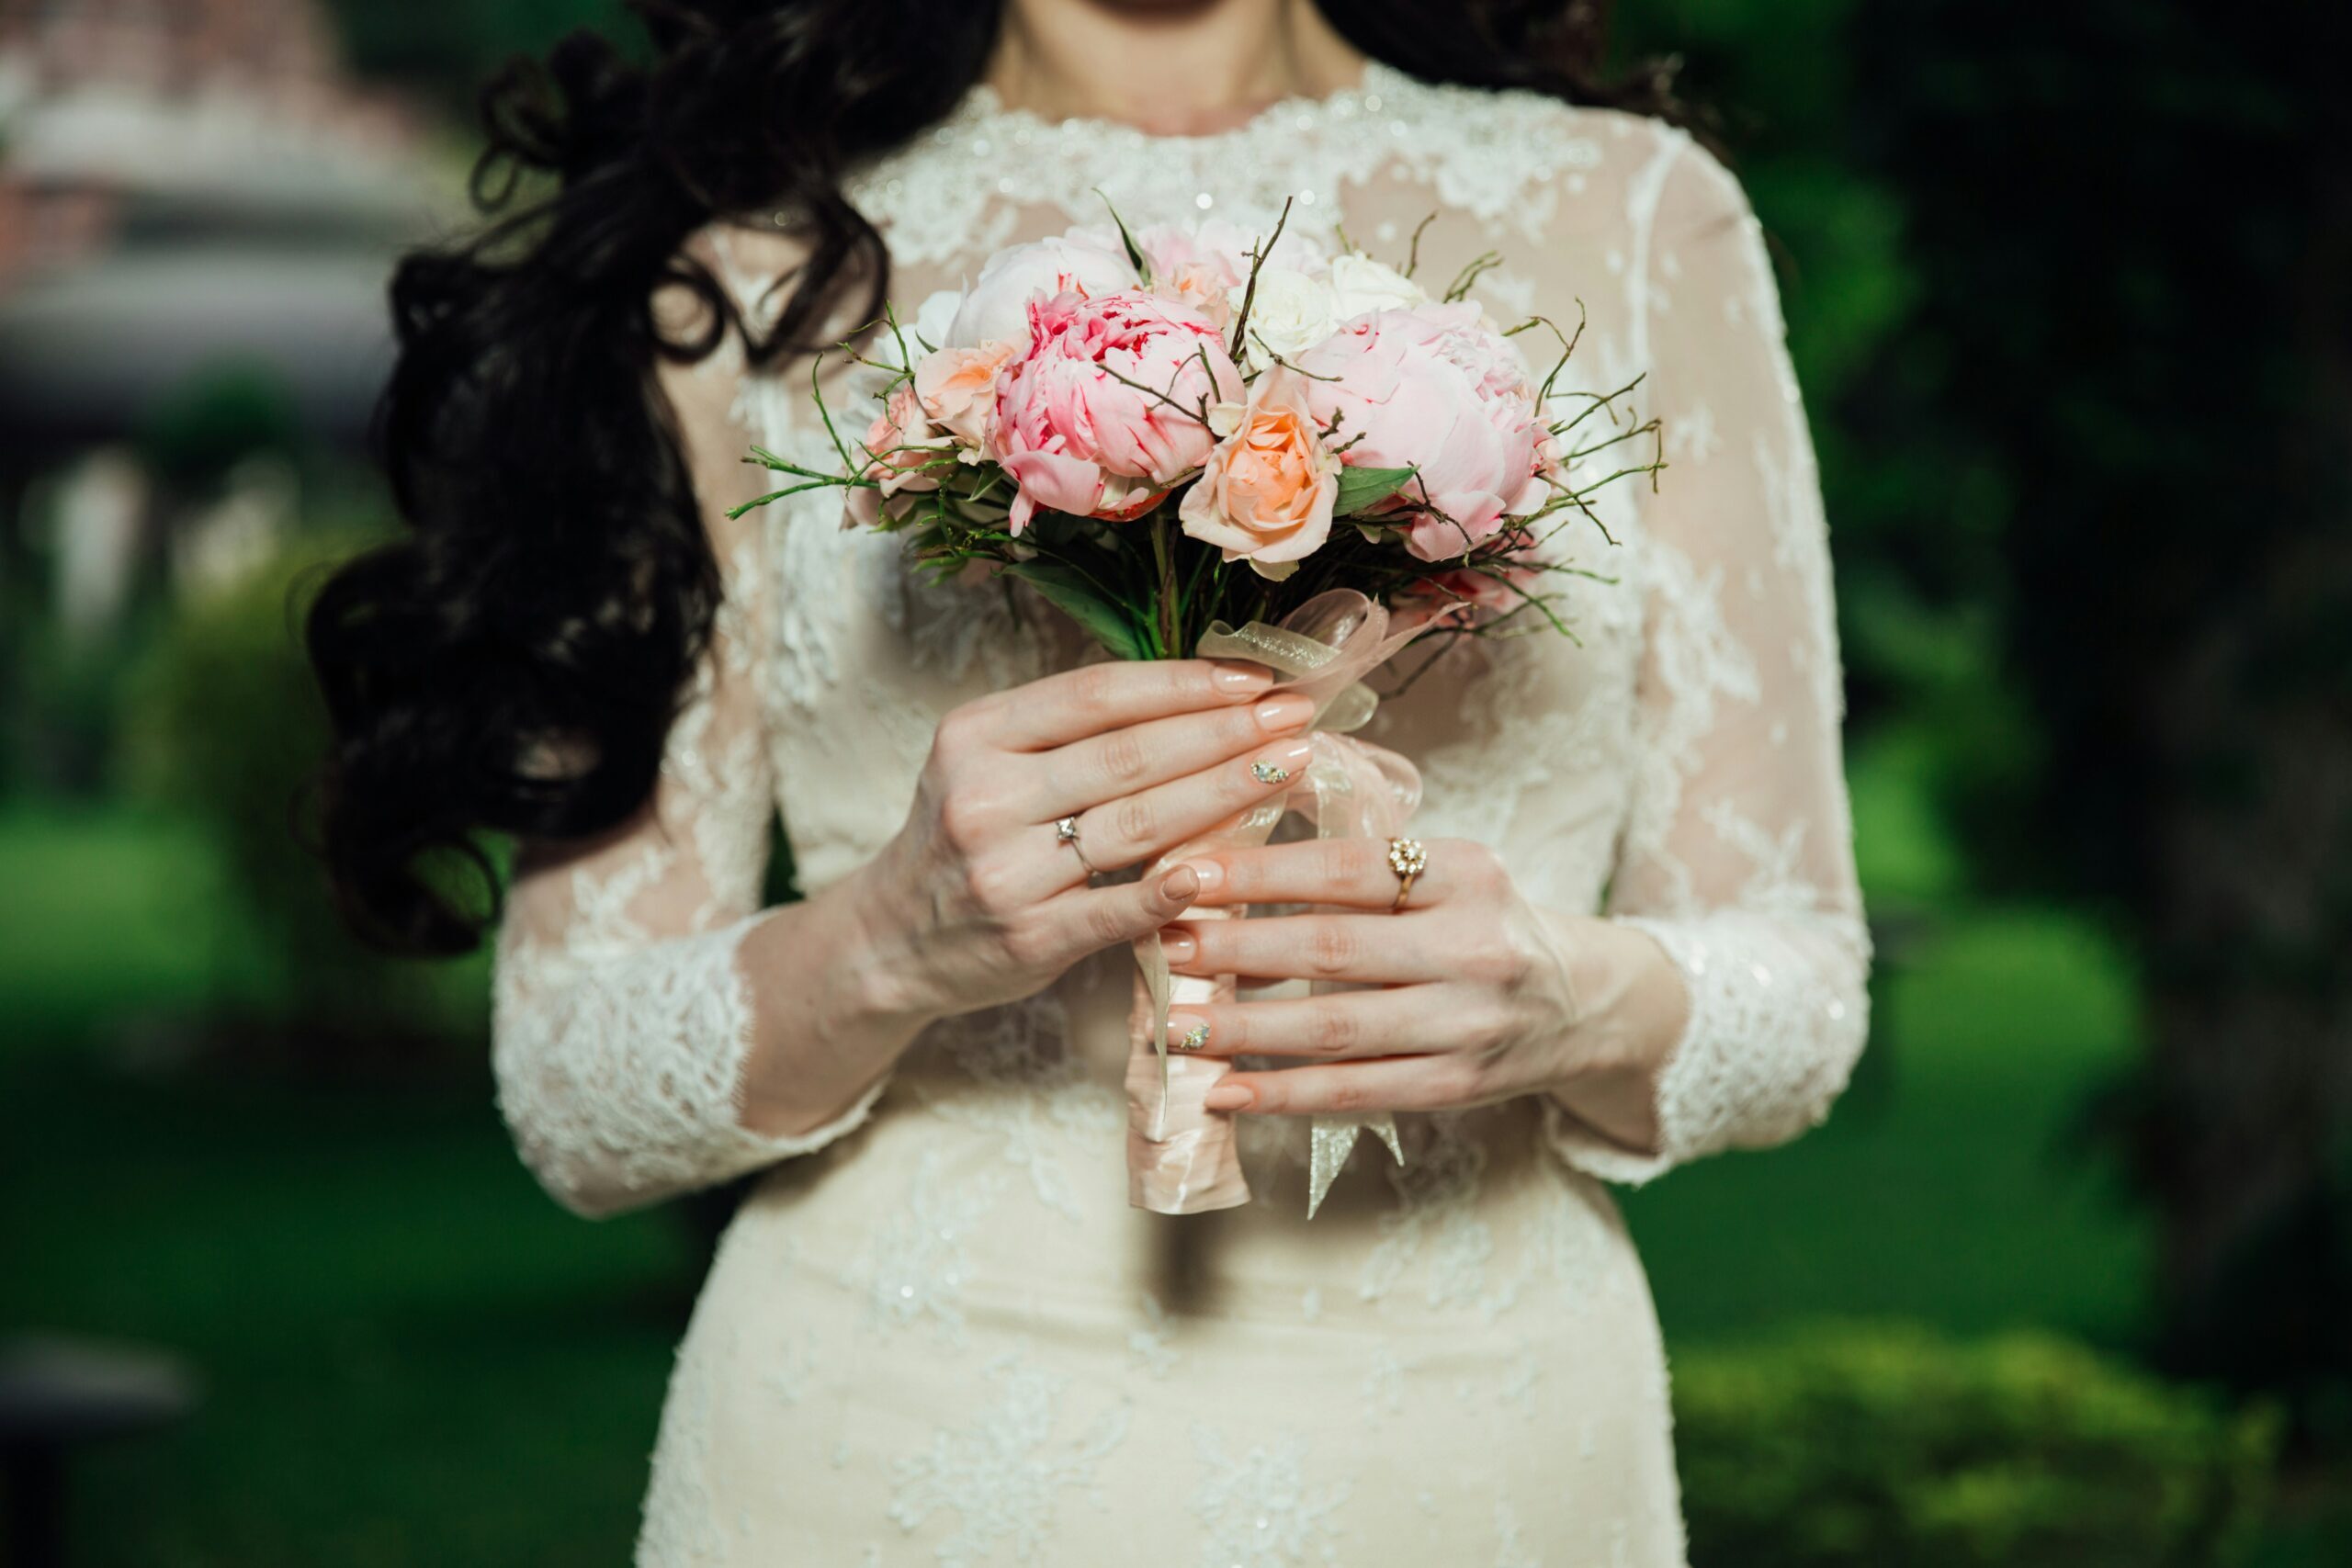 A person wearing a white wedding dress, holding a brides bouquet.